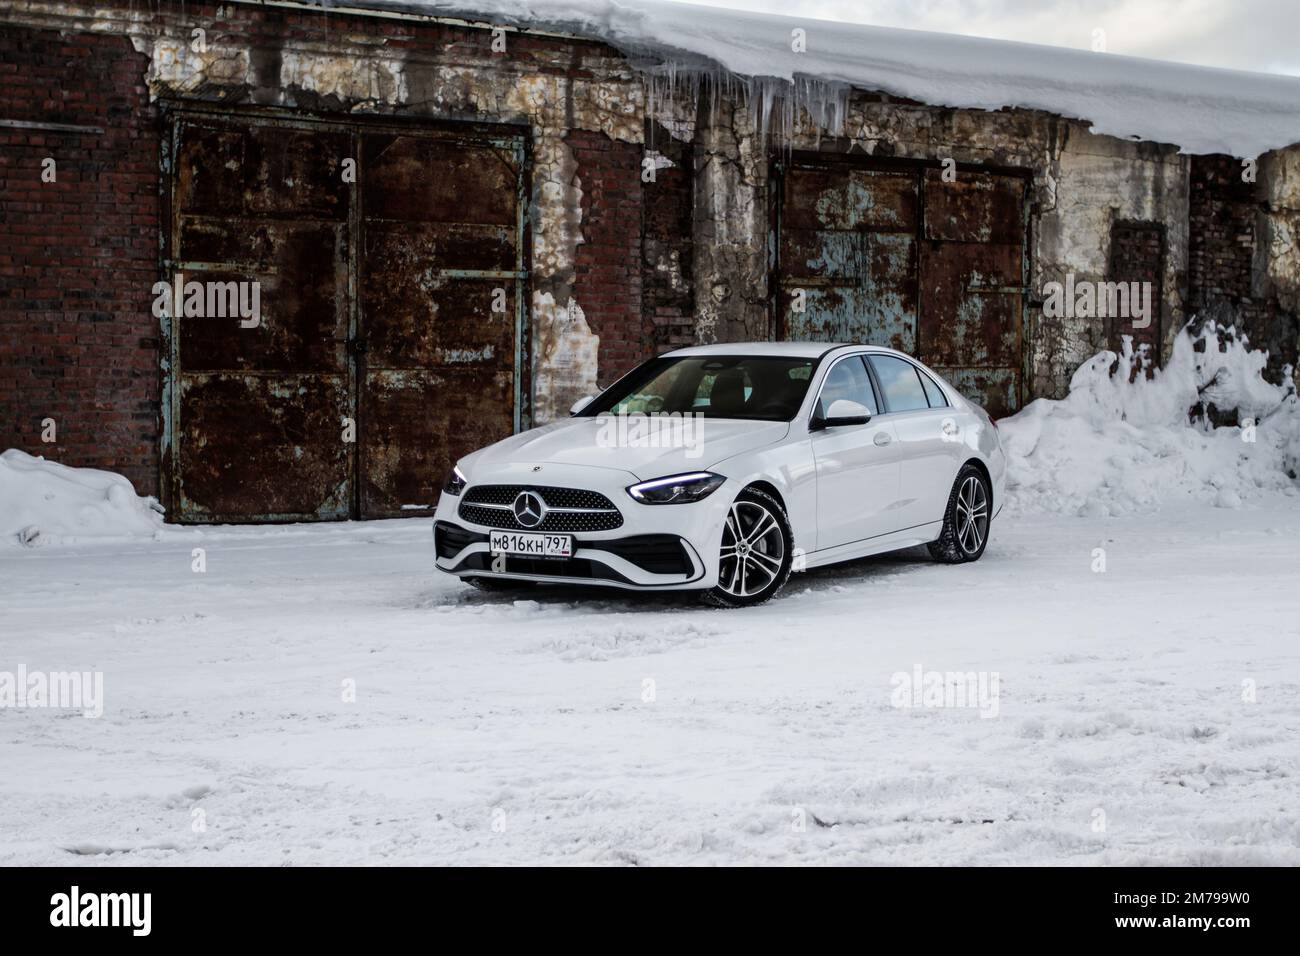 MOSCOW, RUSSIA - FEBRUARY 02, 2022. Mercedes-Benz C-Class 200